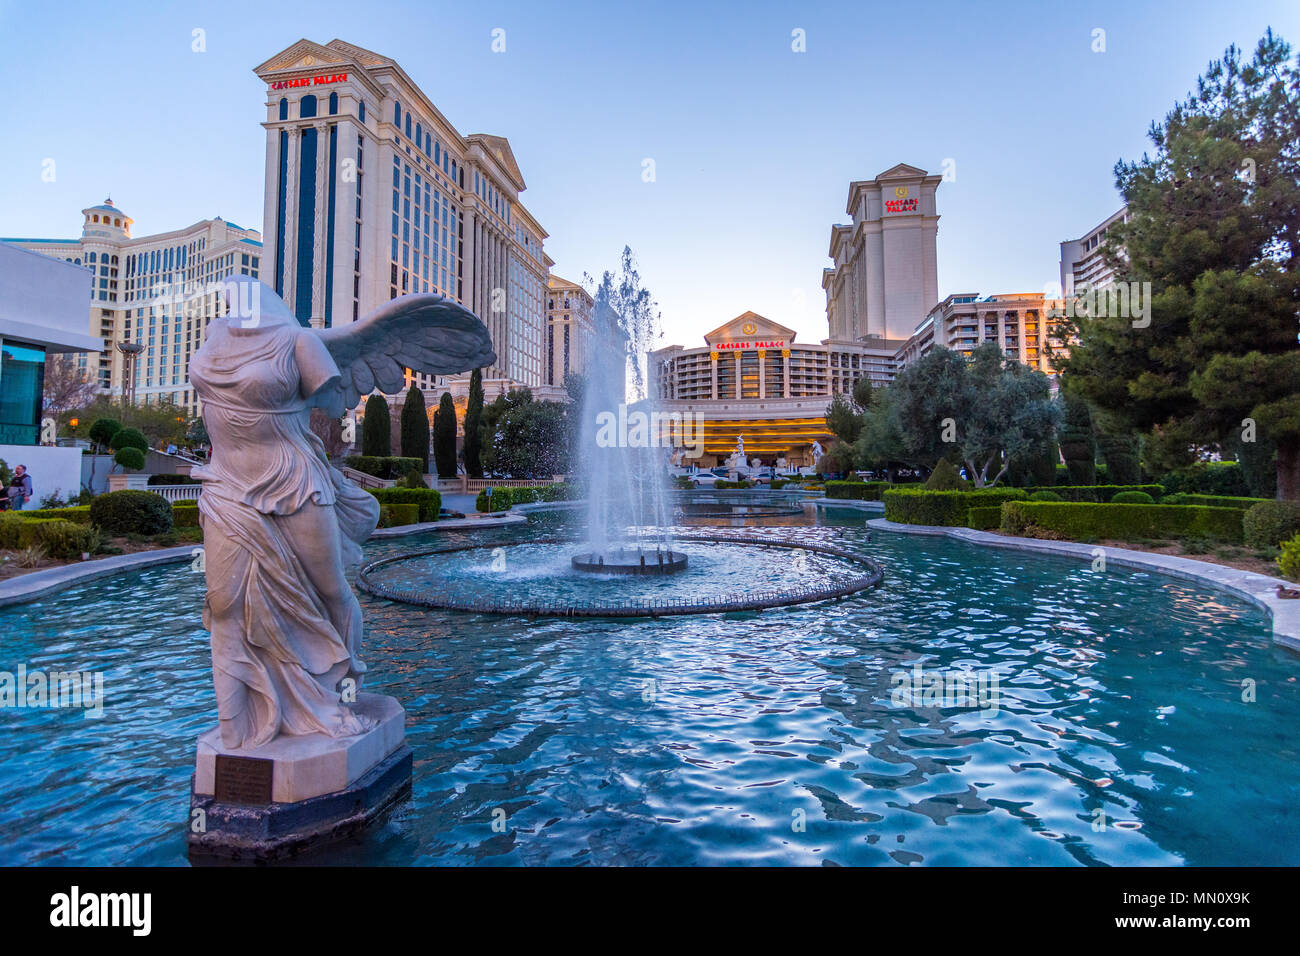 Las vegas, US - March 27, 2018: The exterior fountains at the Ceasar's palace hotel in Las Vegas as seen at dusk Stock Photo